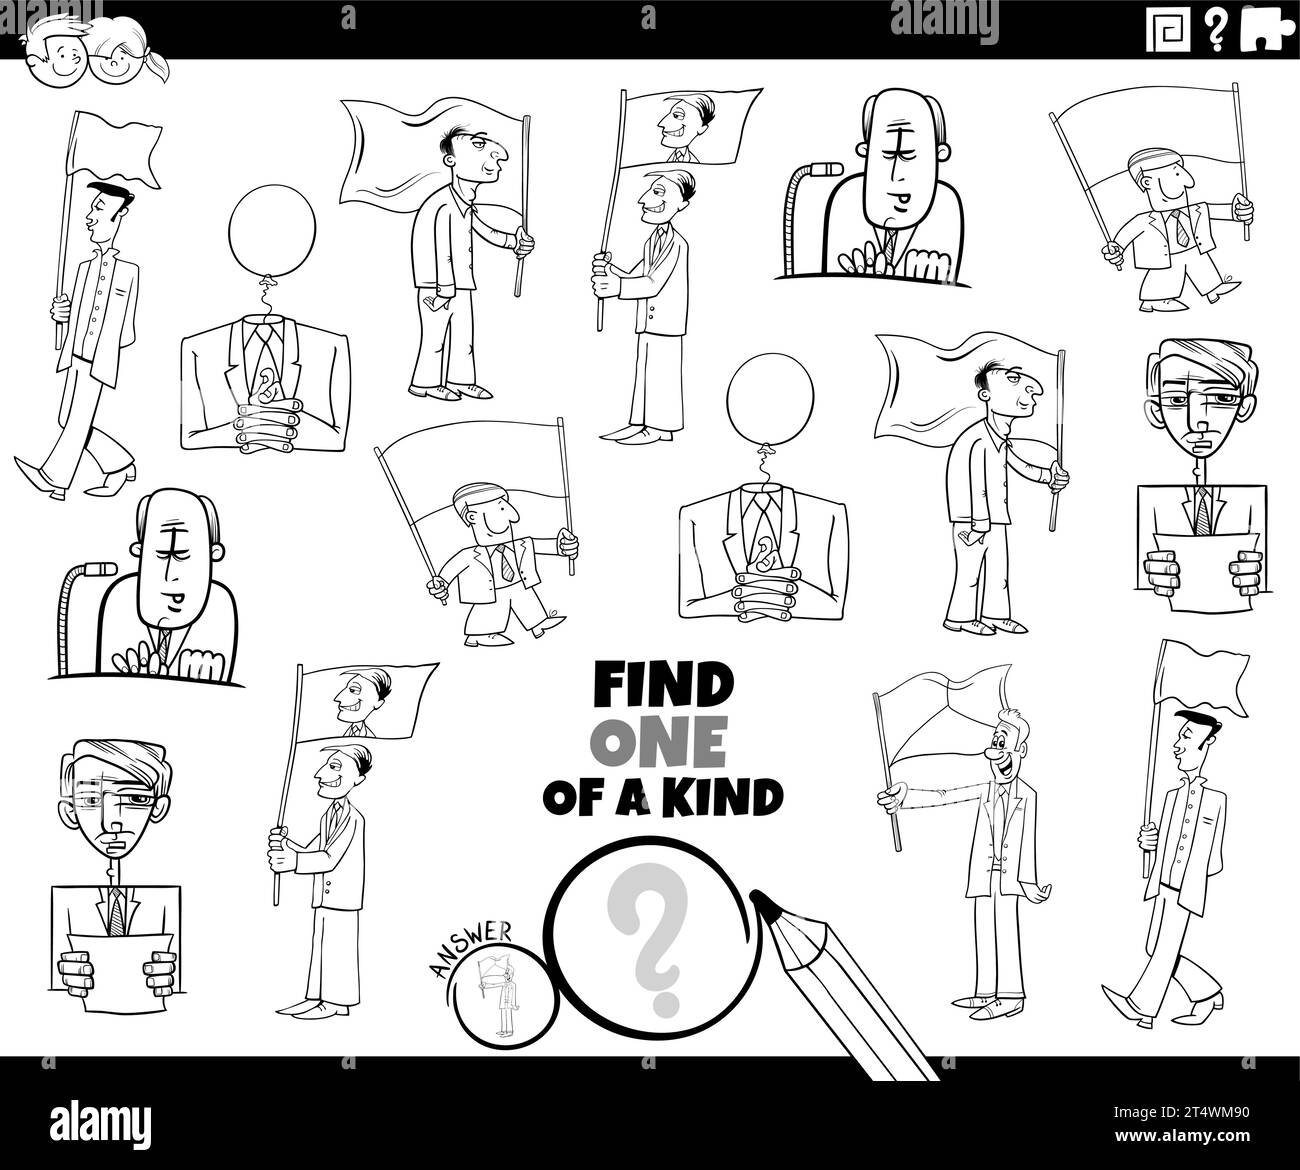 Black and white cartoon illustration of find one of a kind picture educational game with businessmen and politician characters coloring page Stock Vector